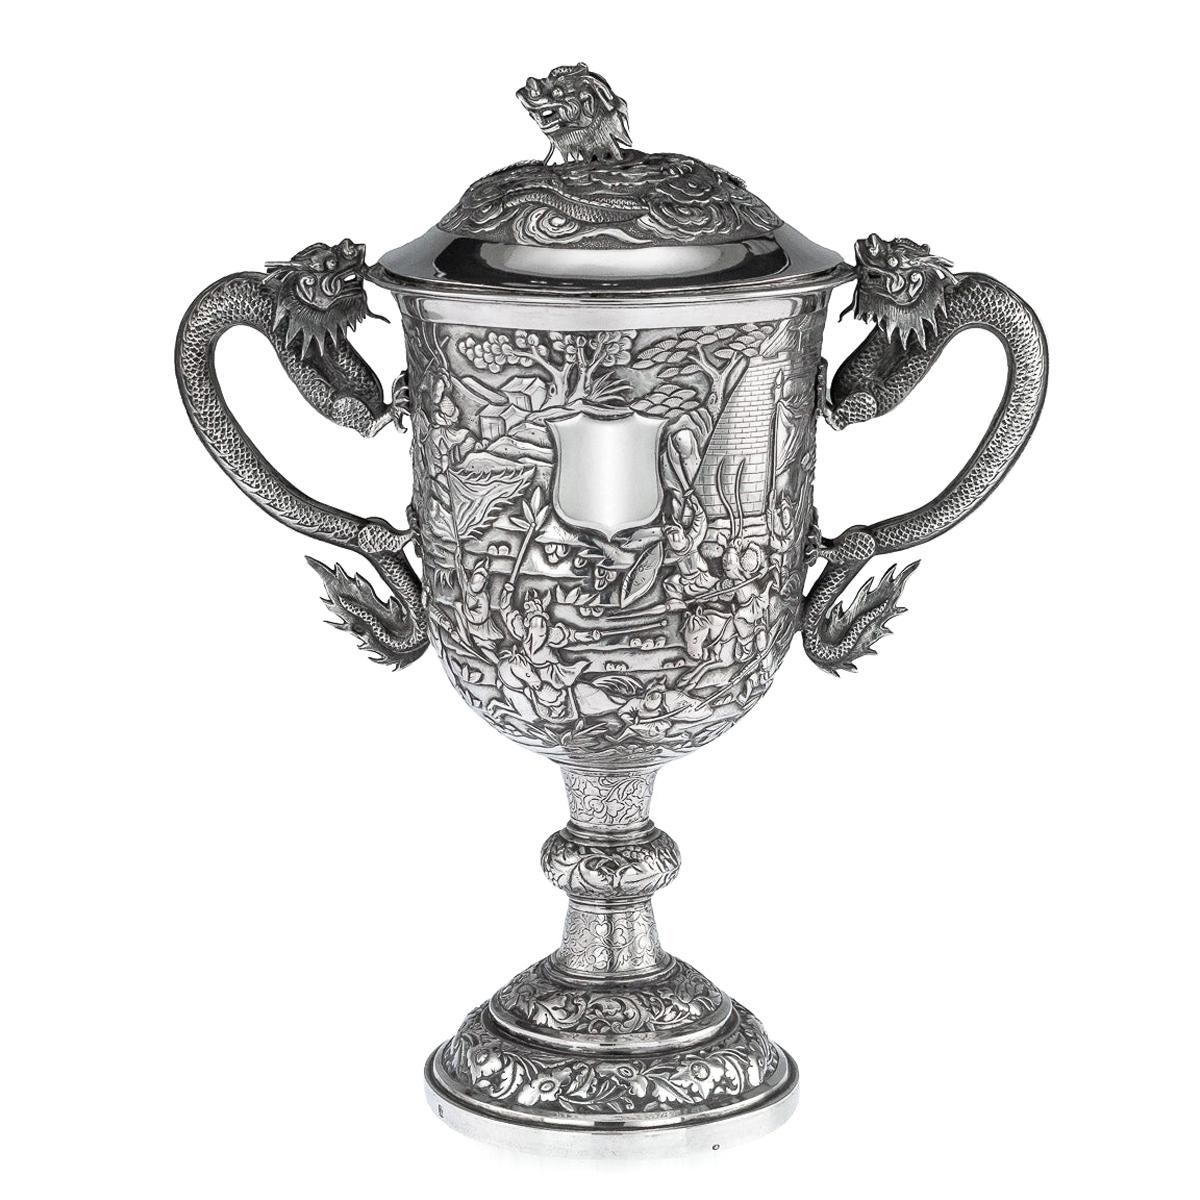 19th Century Chinese Export Silver Two-Handle Cup & Cover, Lee Ching, circa 1860